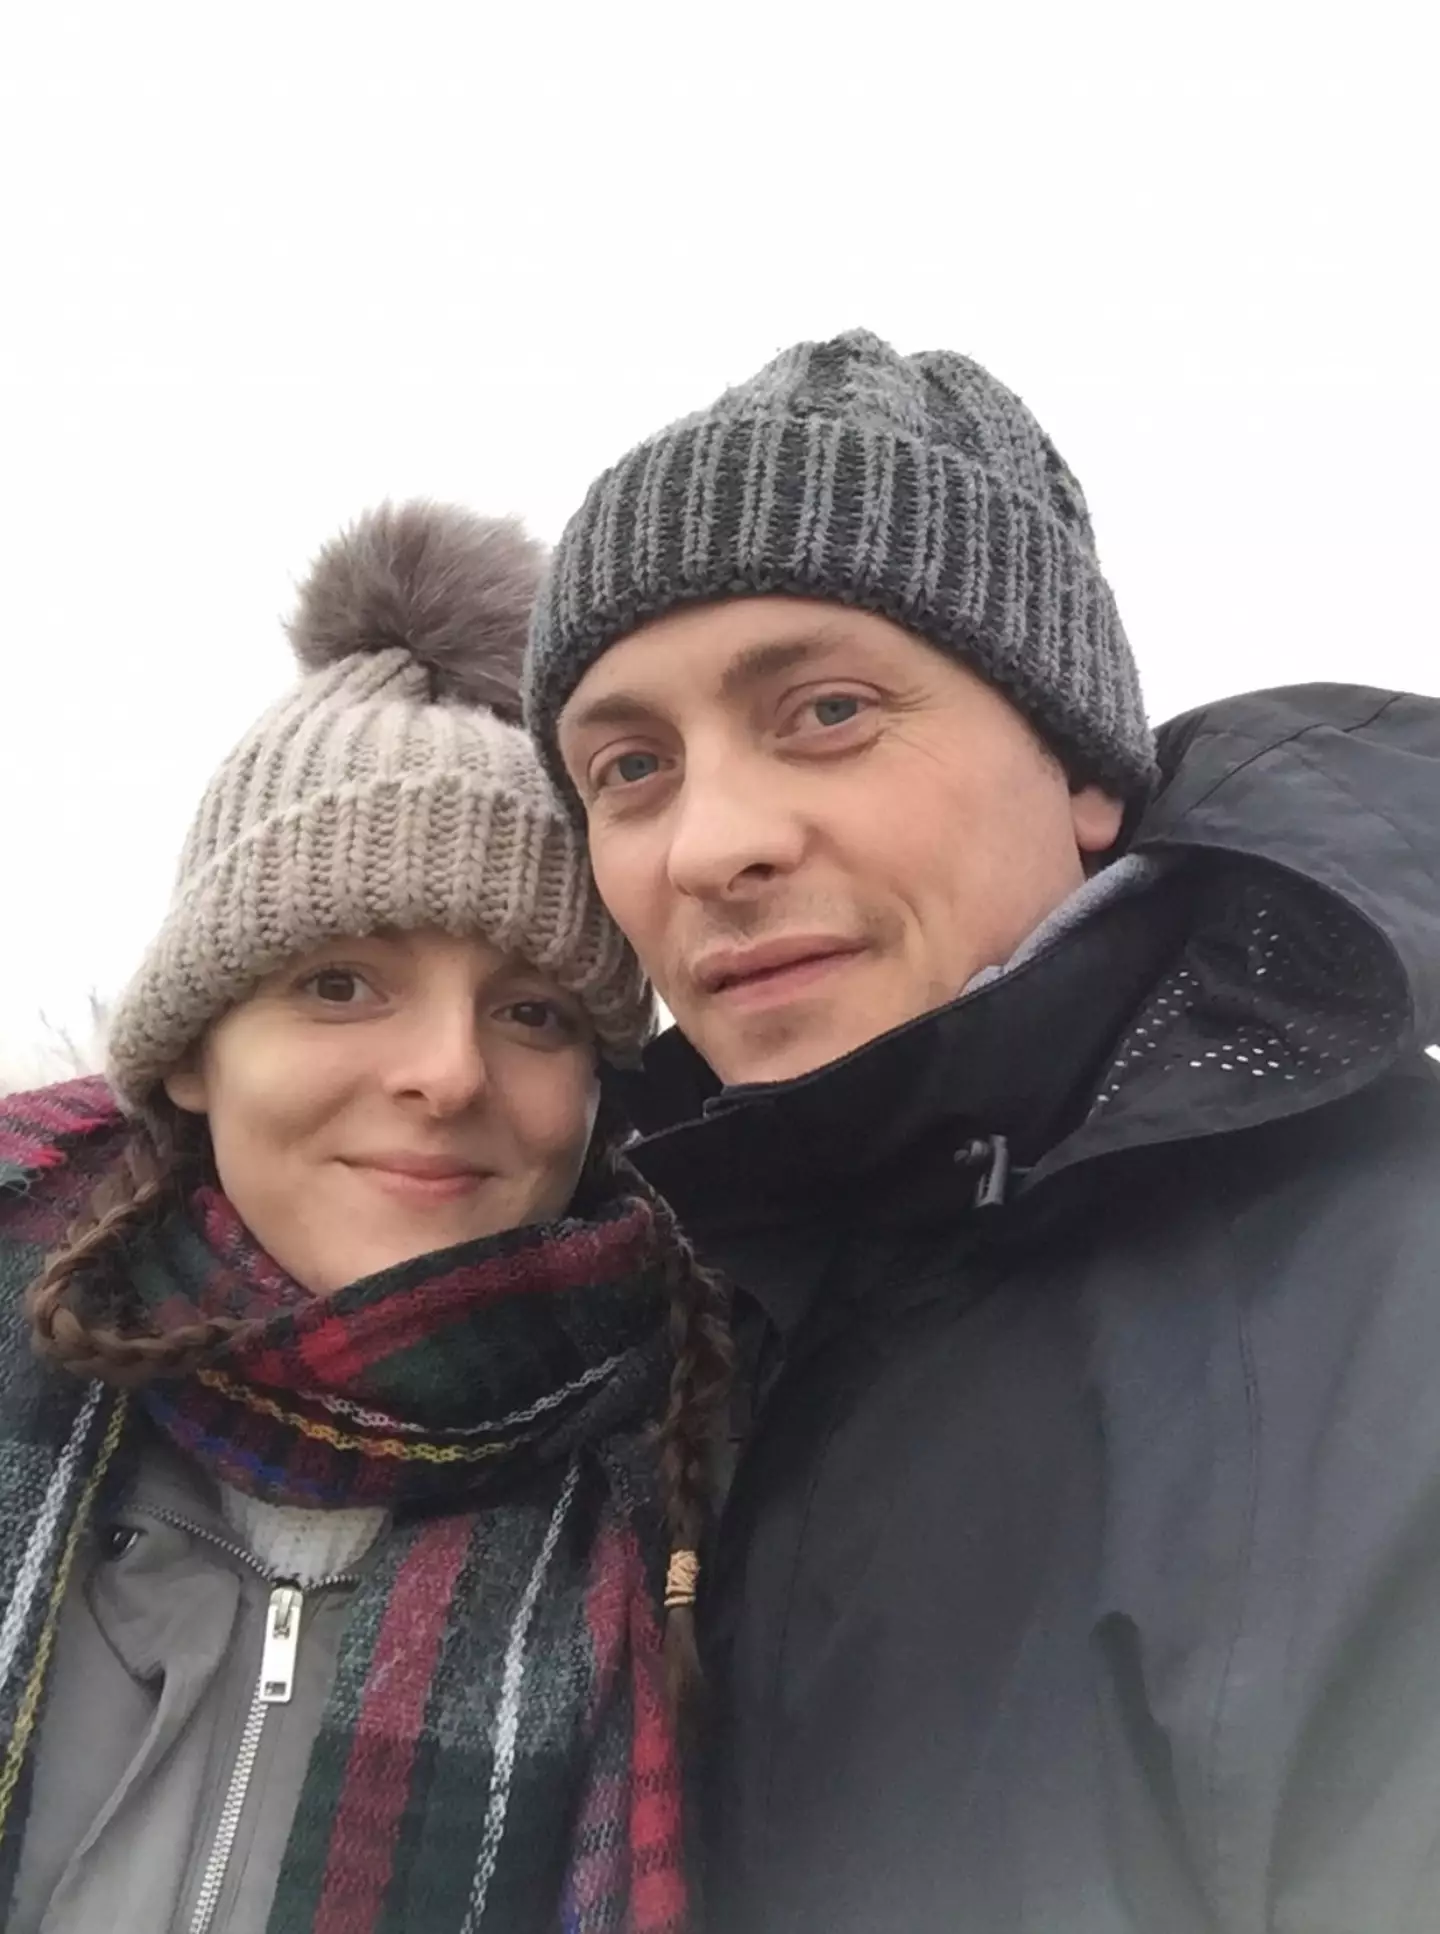 Jess and partner Ross have been through three ectopic pregnancies.